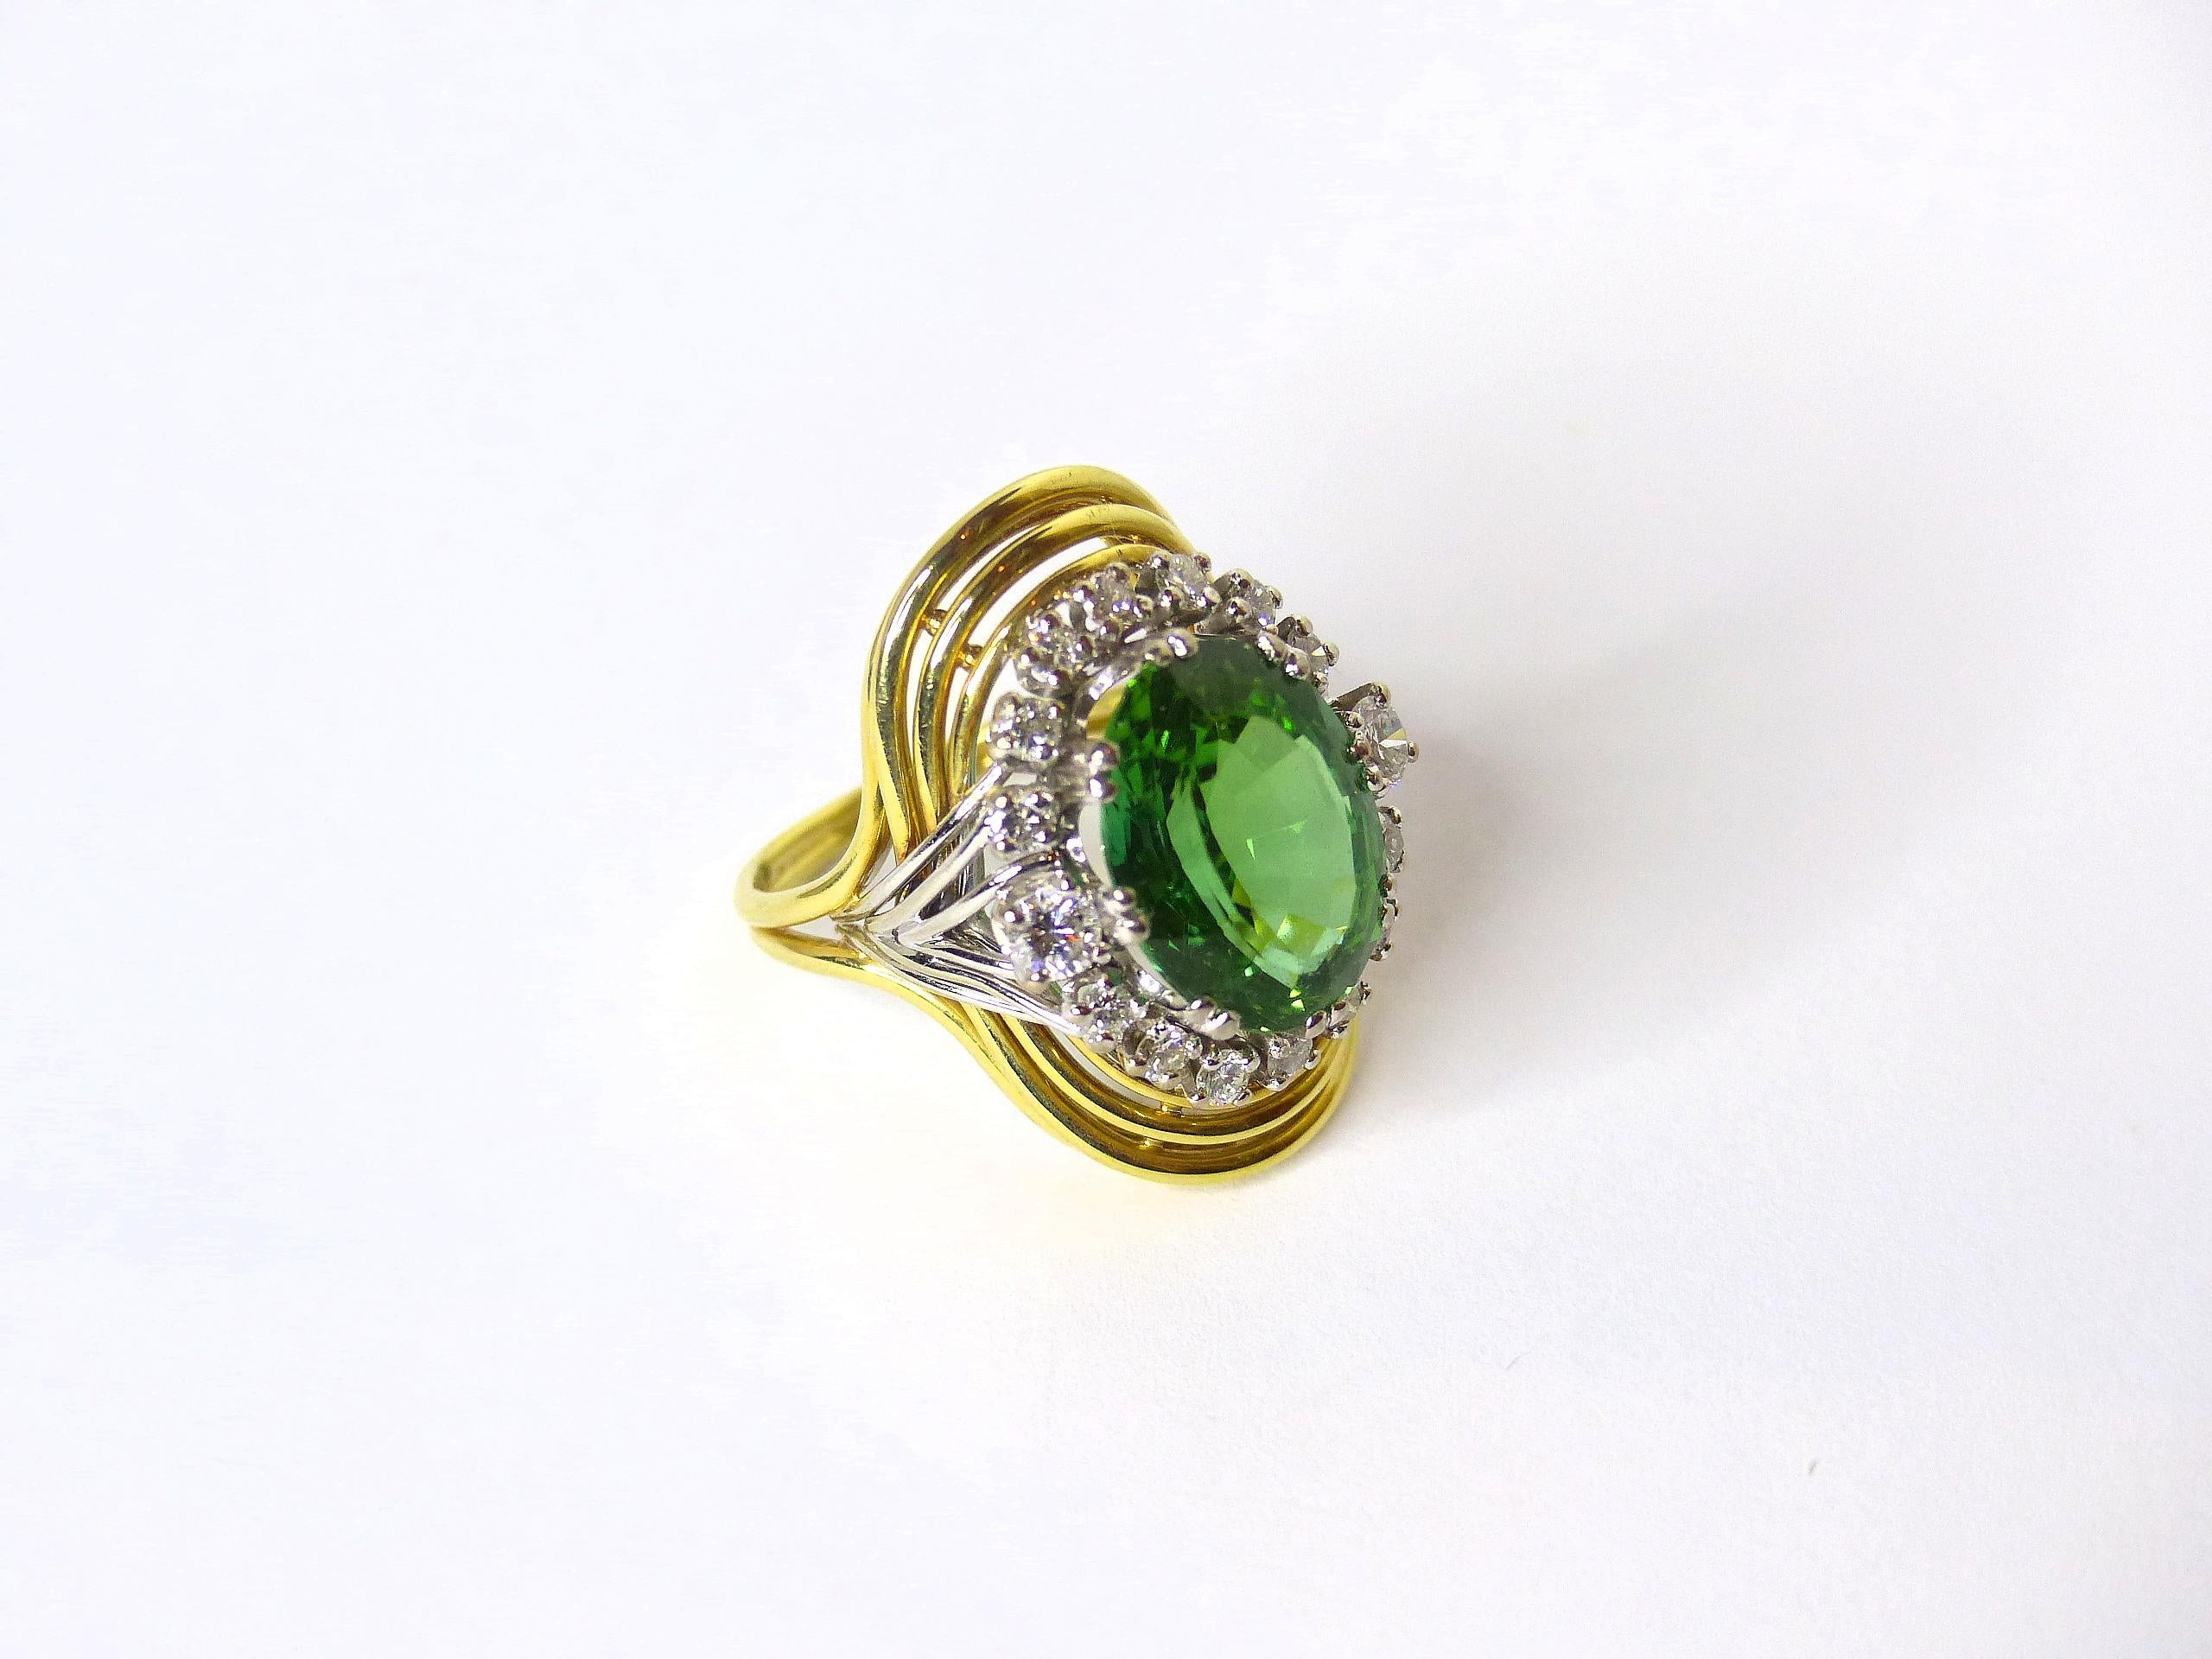 Neoclassical Ring in Yellow Gold with 1 green Tourmaline and Diamonds